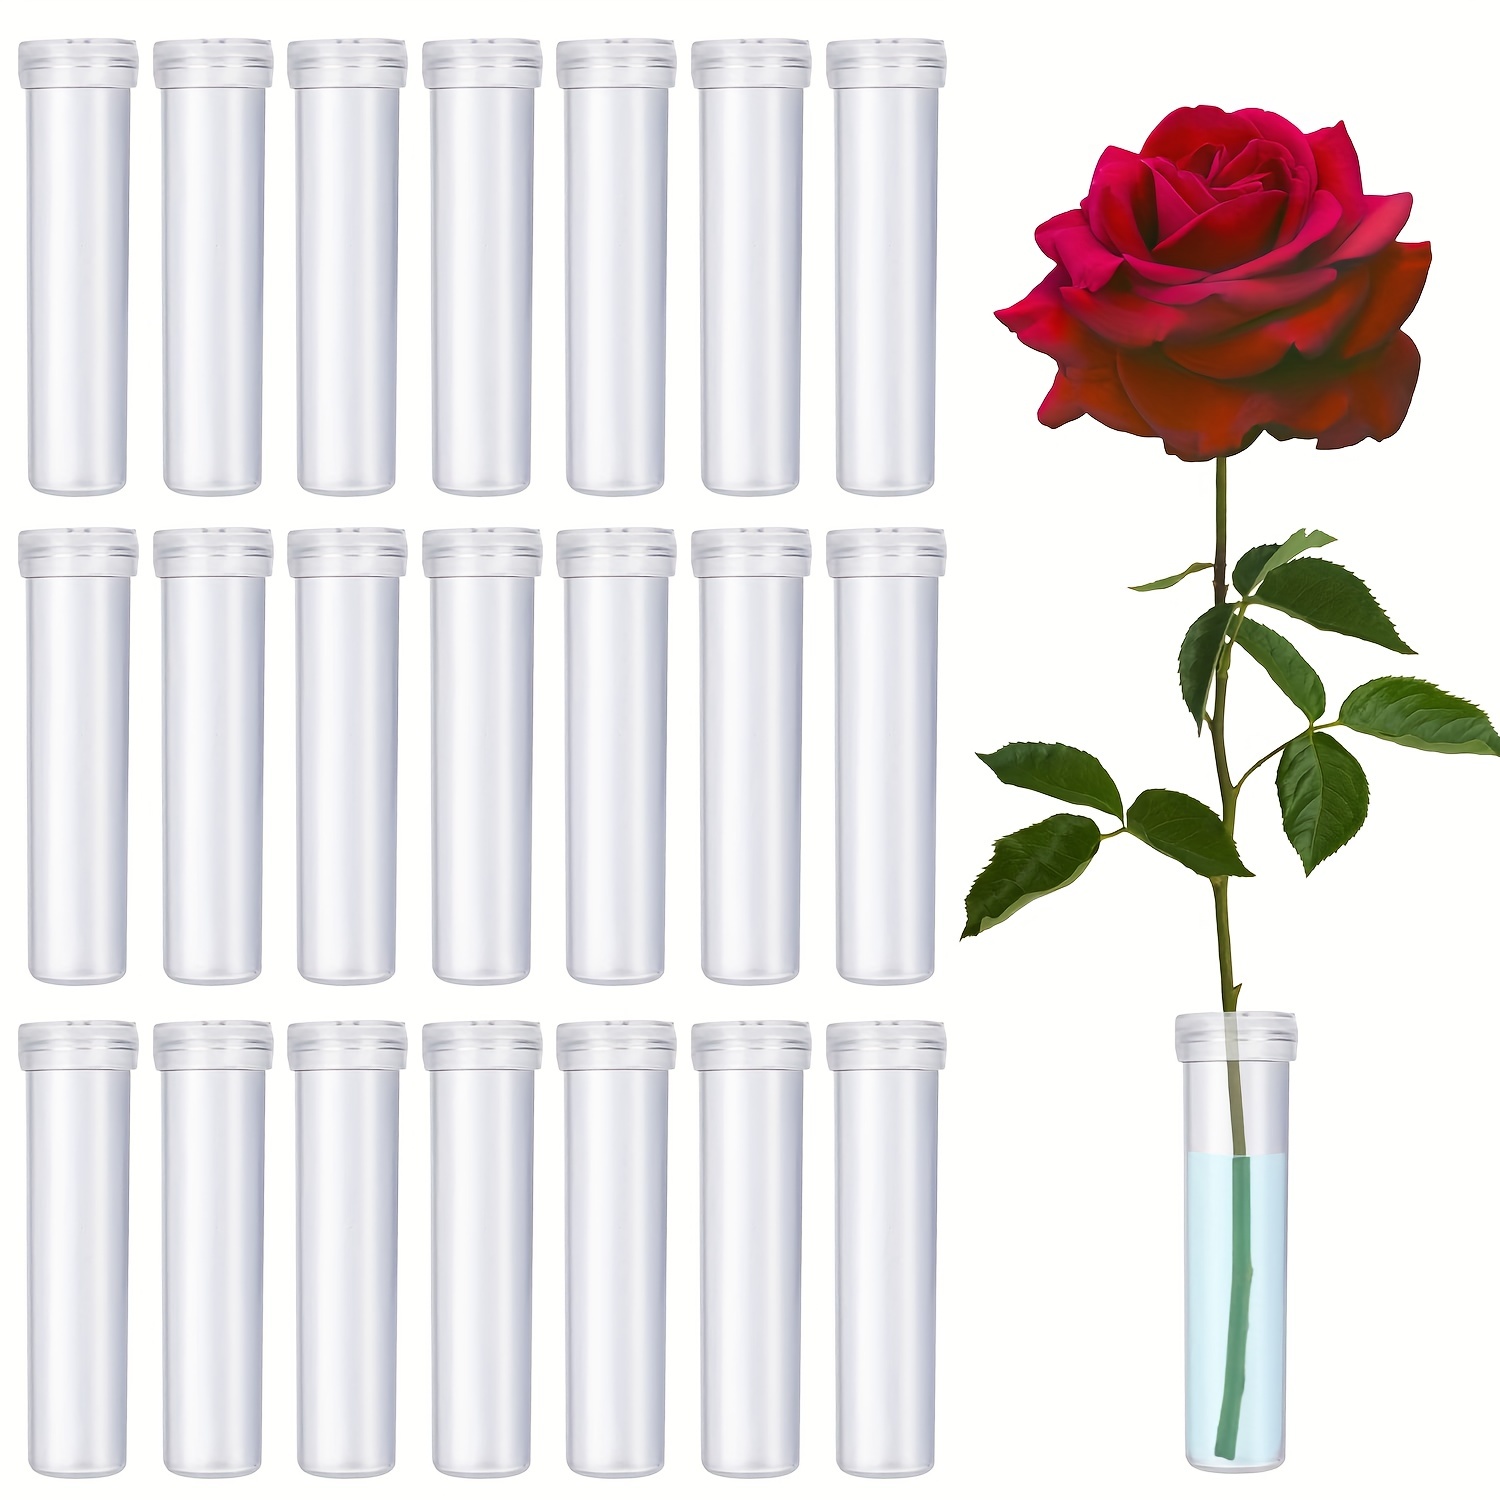 100pcs floral stem water tube water tubes for flowers rose flower